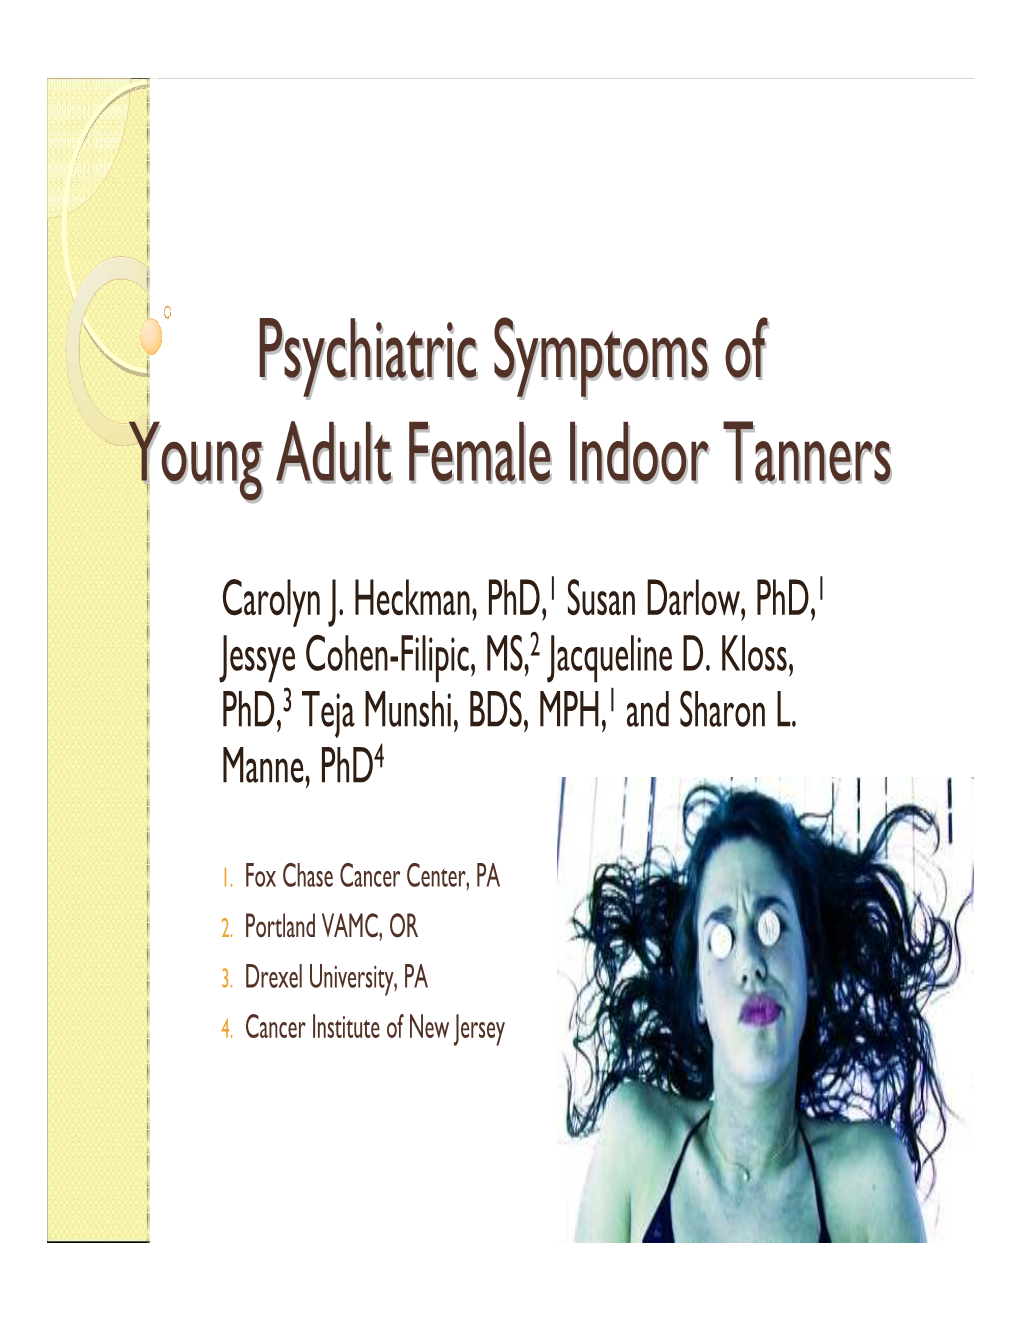 Indoor Tanning As a Problem ◦ Opiate–Like Reactions to Tanning ◦ Tolerance to the Physiological Effects of Tanning ◦ (Longacre Et Al., 2006; Hillhouse Et Al., 2007)